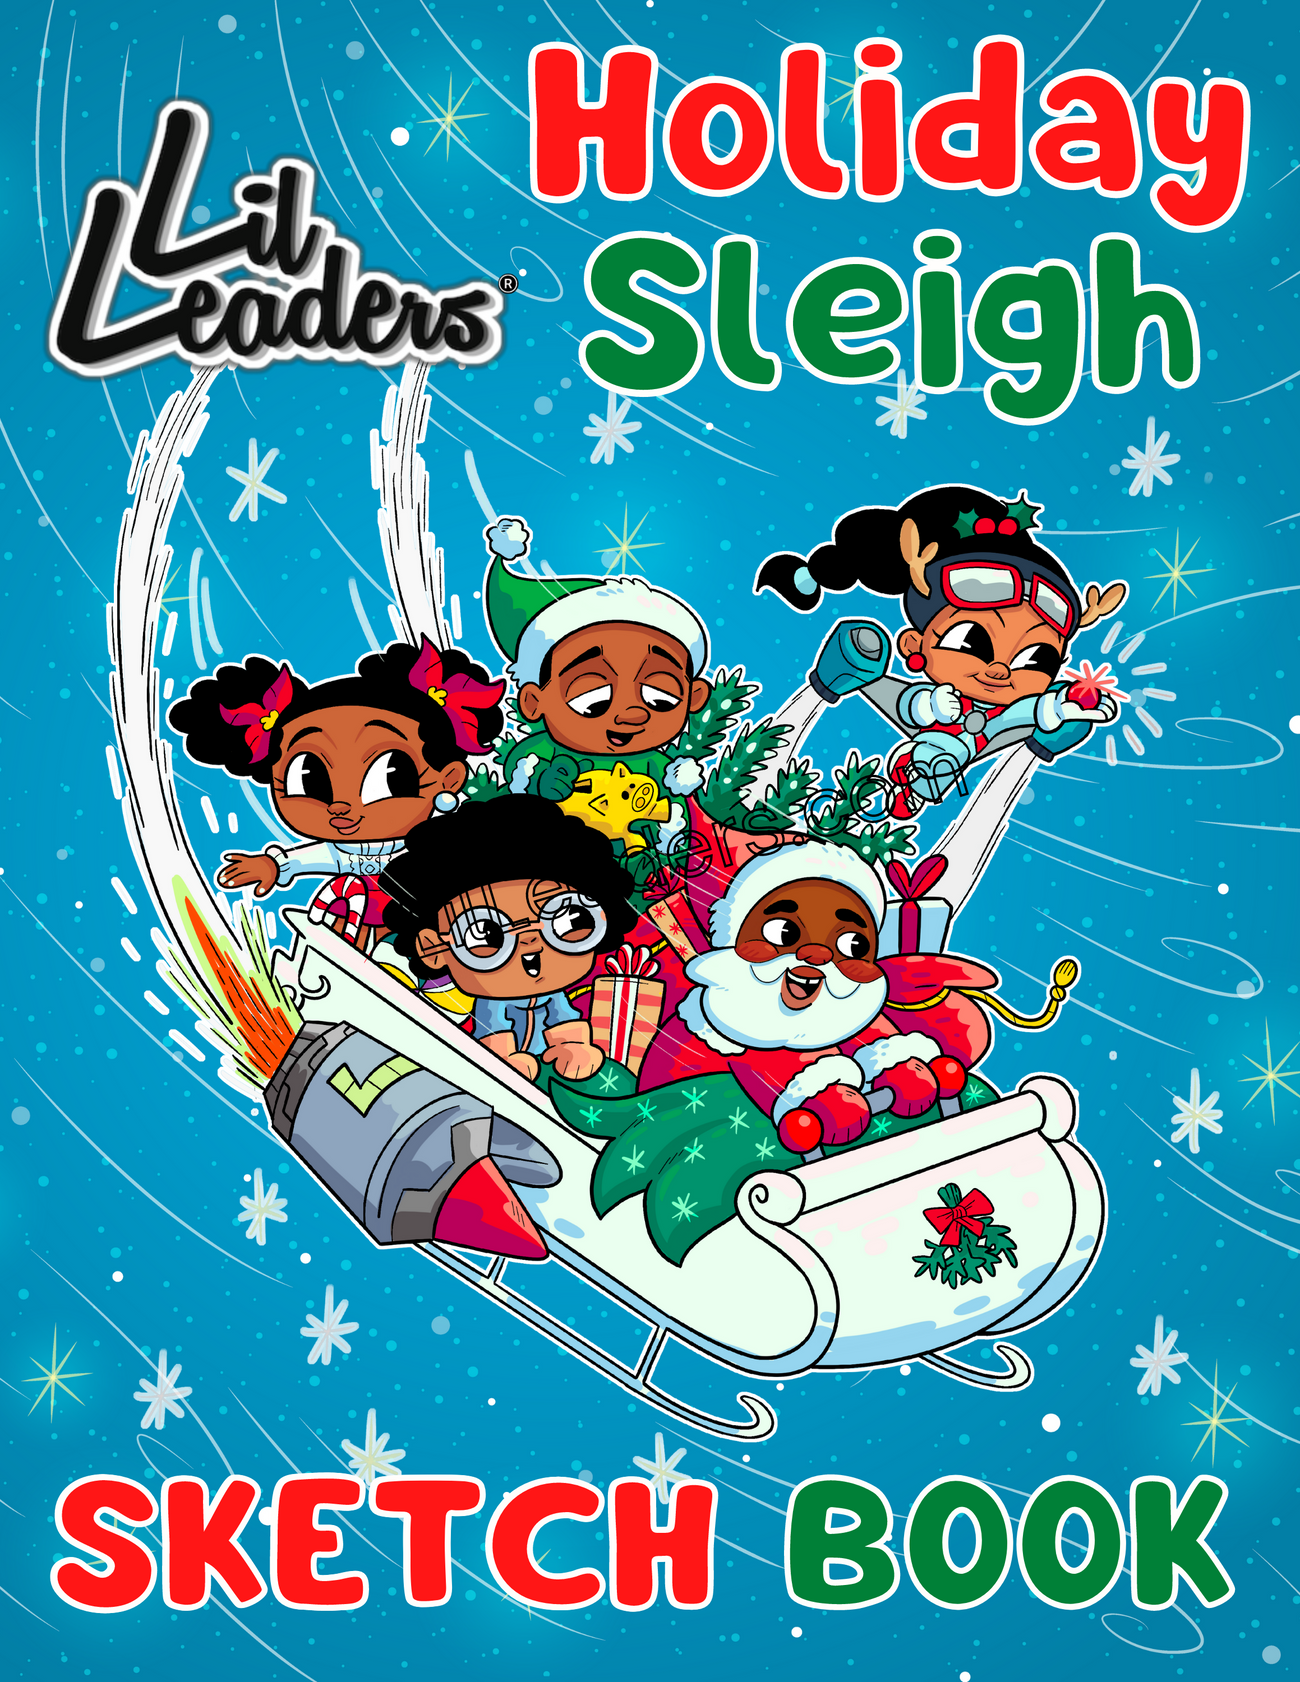 Lil Leaders Holiday Sleigh Sketch Book